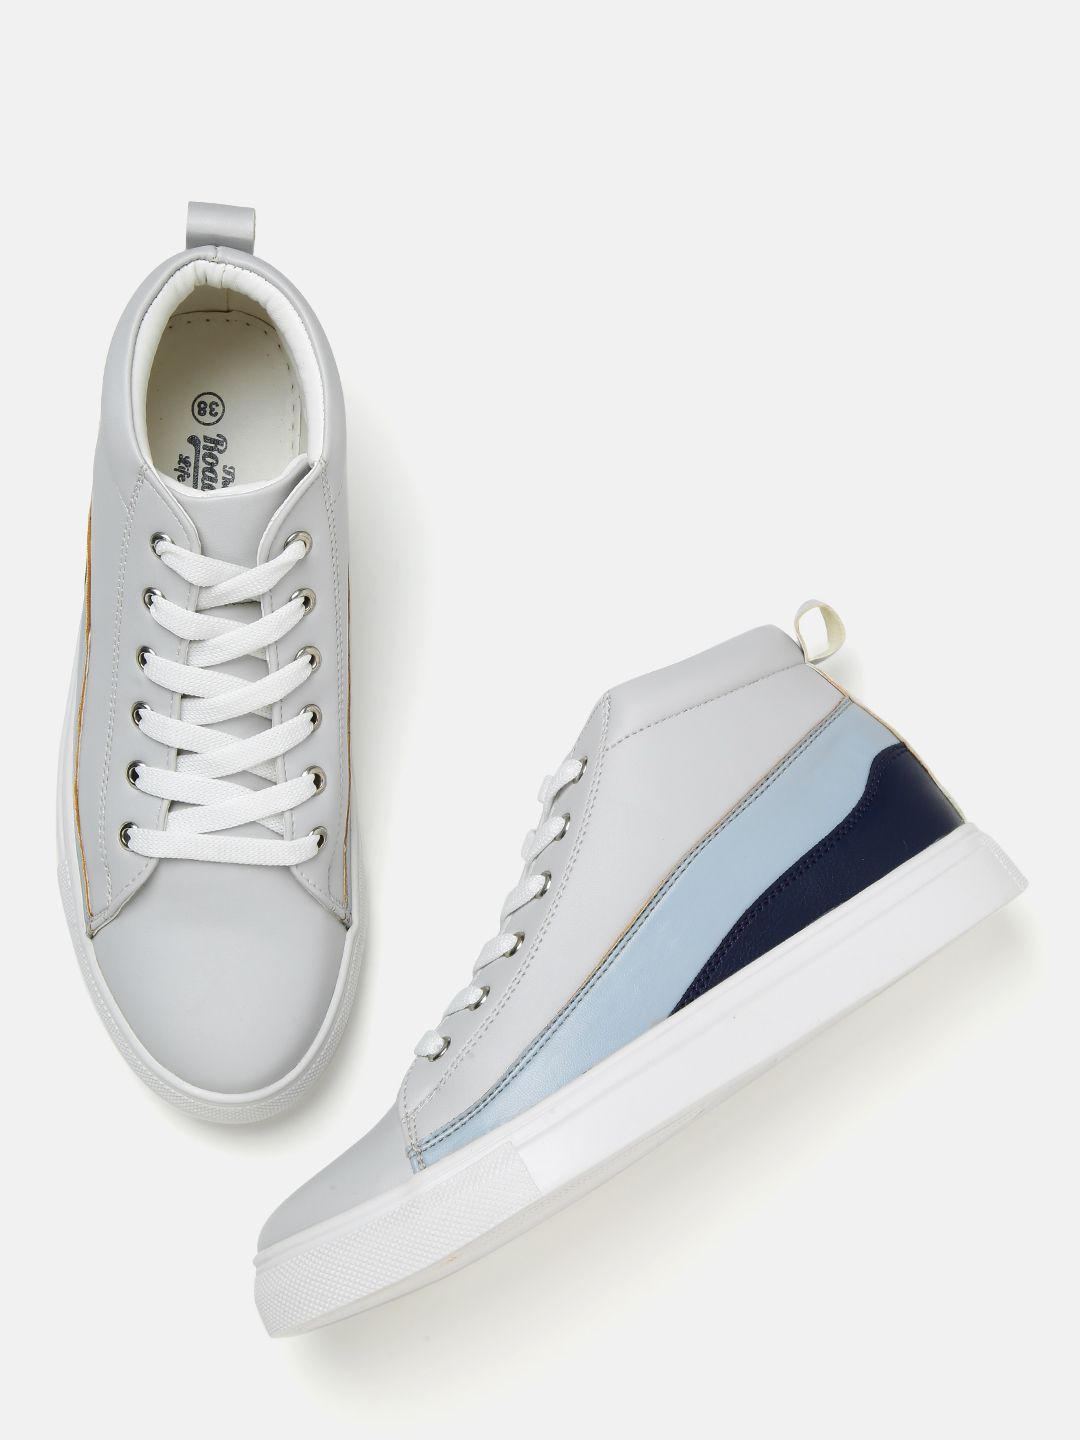 The Roadster Lifestyle Co Women Grey & Blue Colourblocked Mid-Top Sneakers Price in India